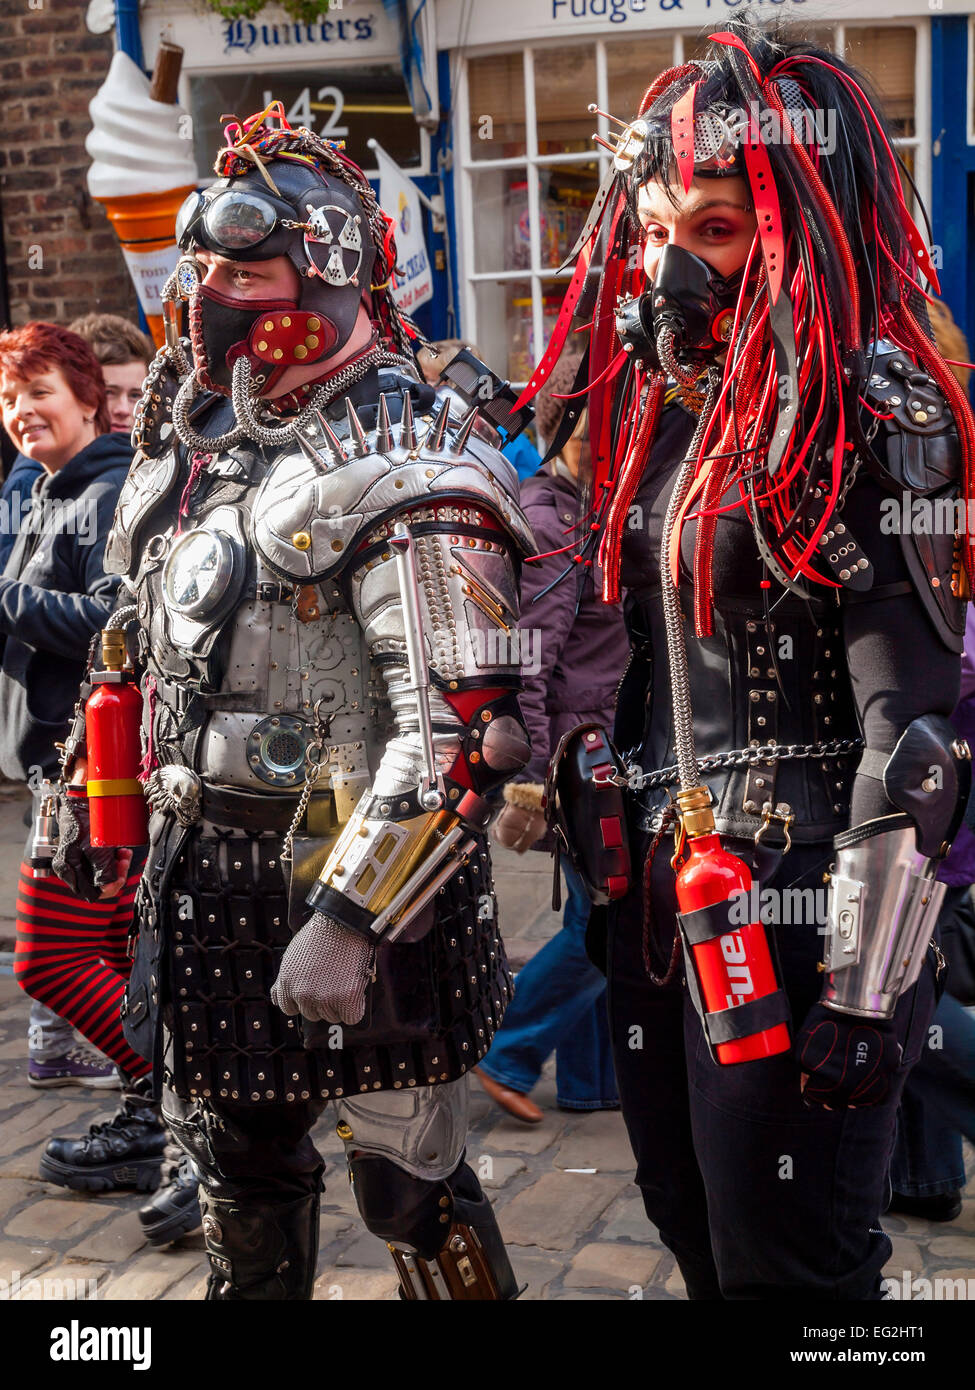 Two young people dressed in very elaborate costumes calling themselves Cybergoths at the Whitby Goth Week End Stock Photo